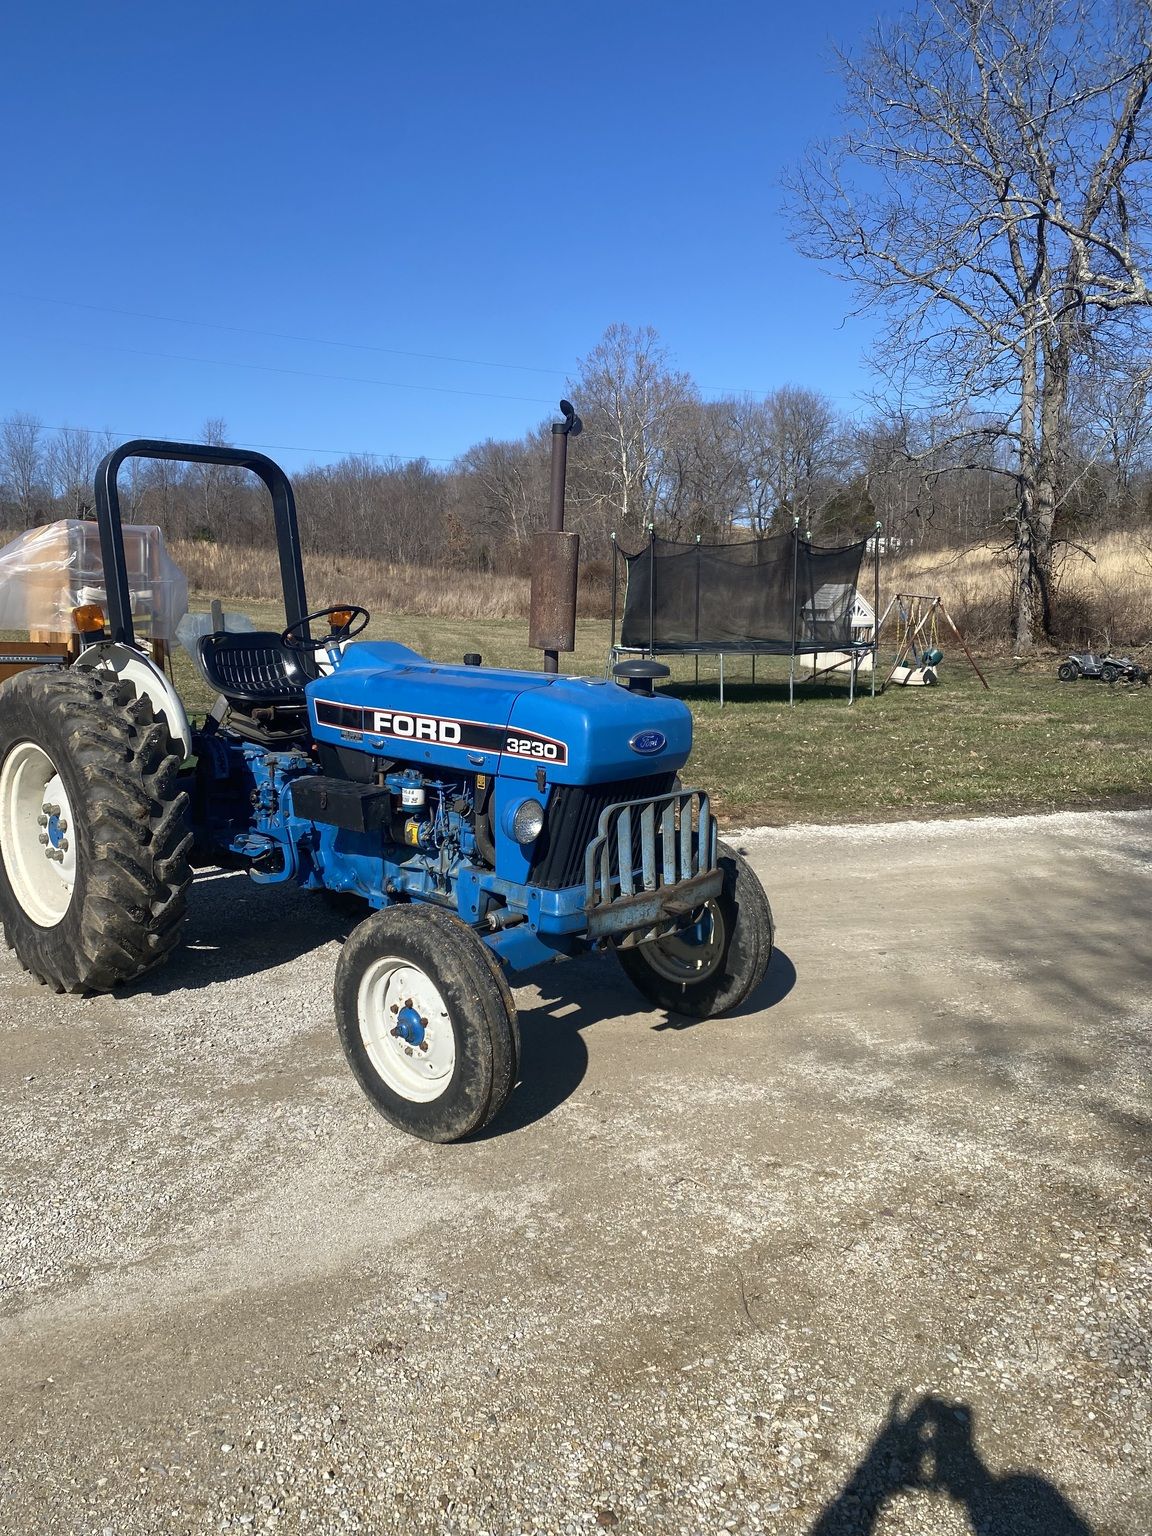 1993 Ford-New Holland 3230